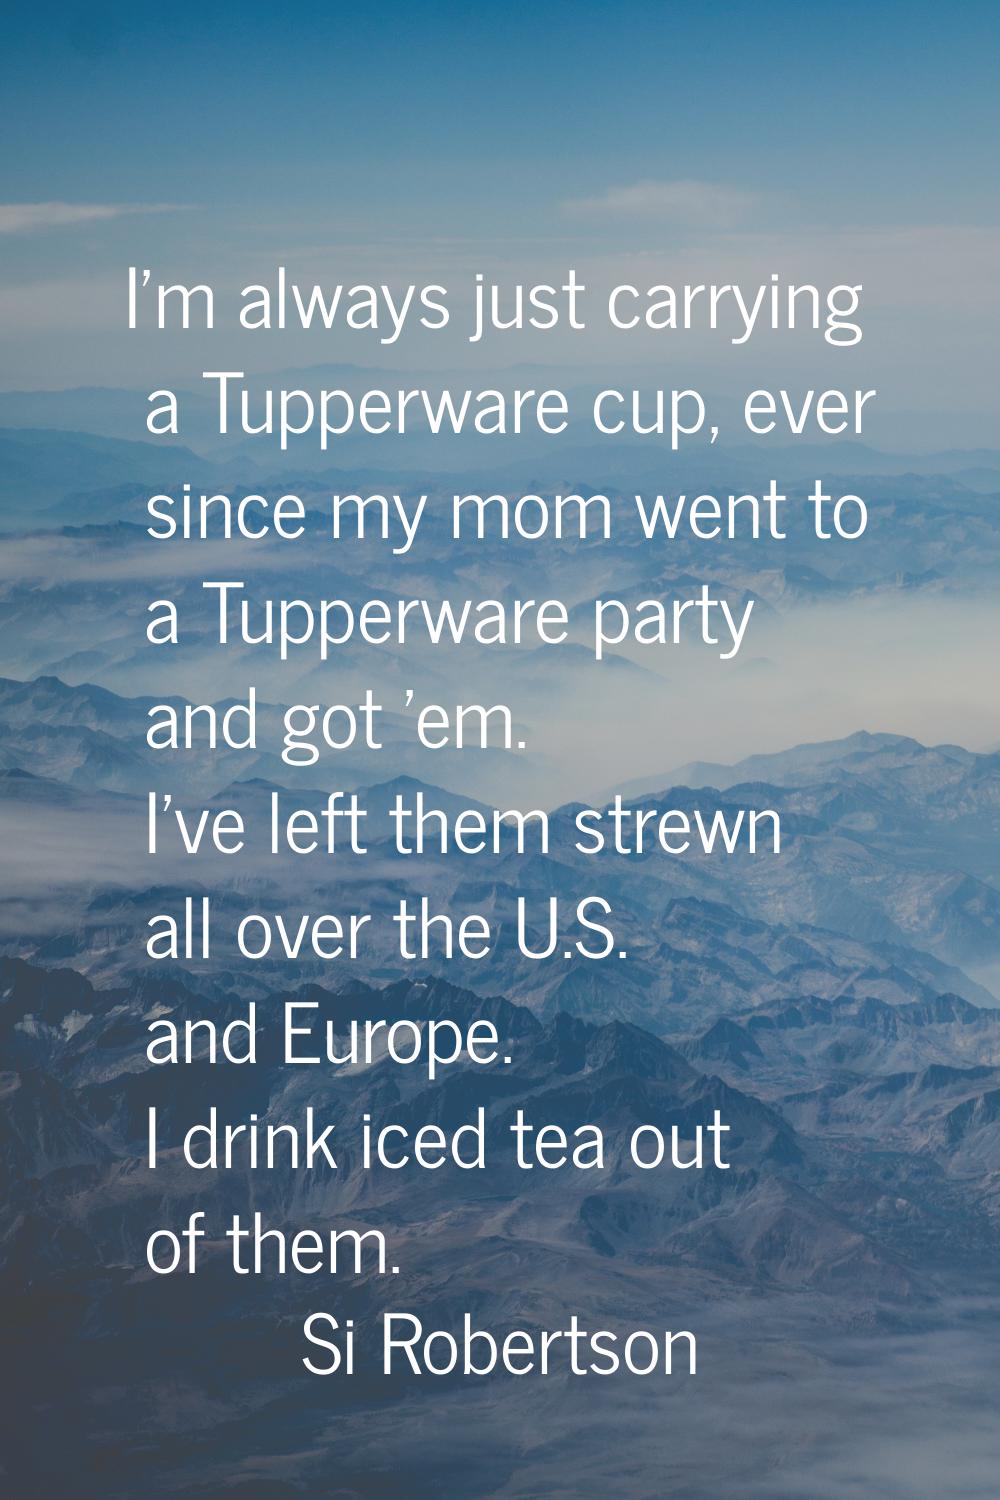 I'm always just carrying a Tupperware cup, ever since my mom went to a Tupperware party and got 'em